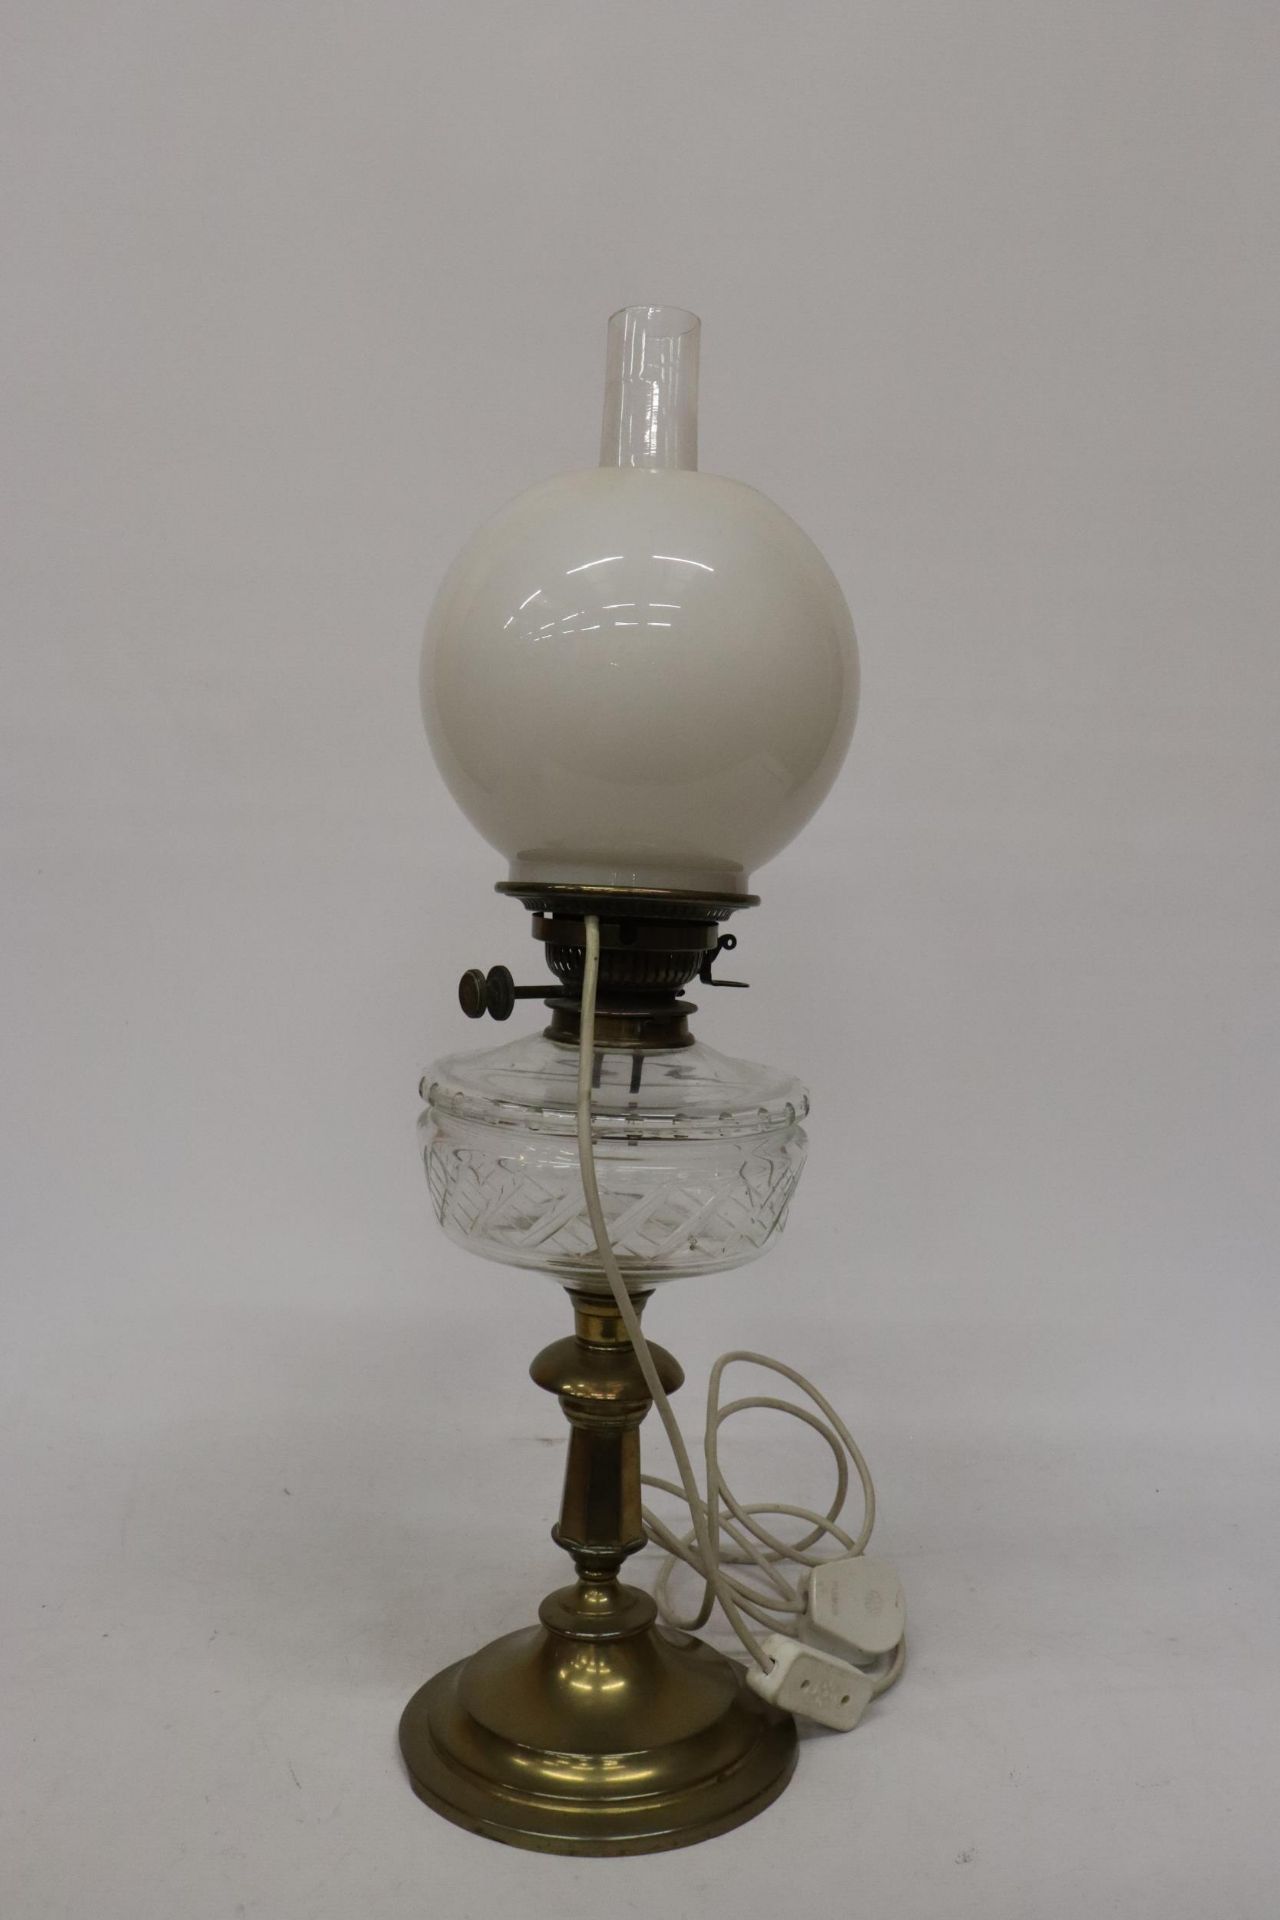 A 19TH CENTURY OIL LAMP CONVERTED TO ELECTRIC WITH A BRASS BASE, CLEAR CUT GLASS RESERVOIR, MILK - Image 3 of 8